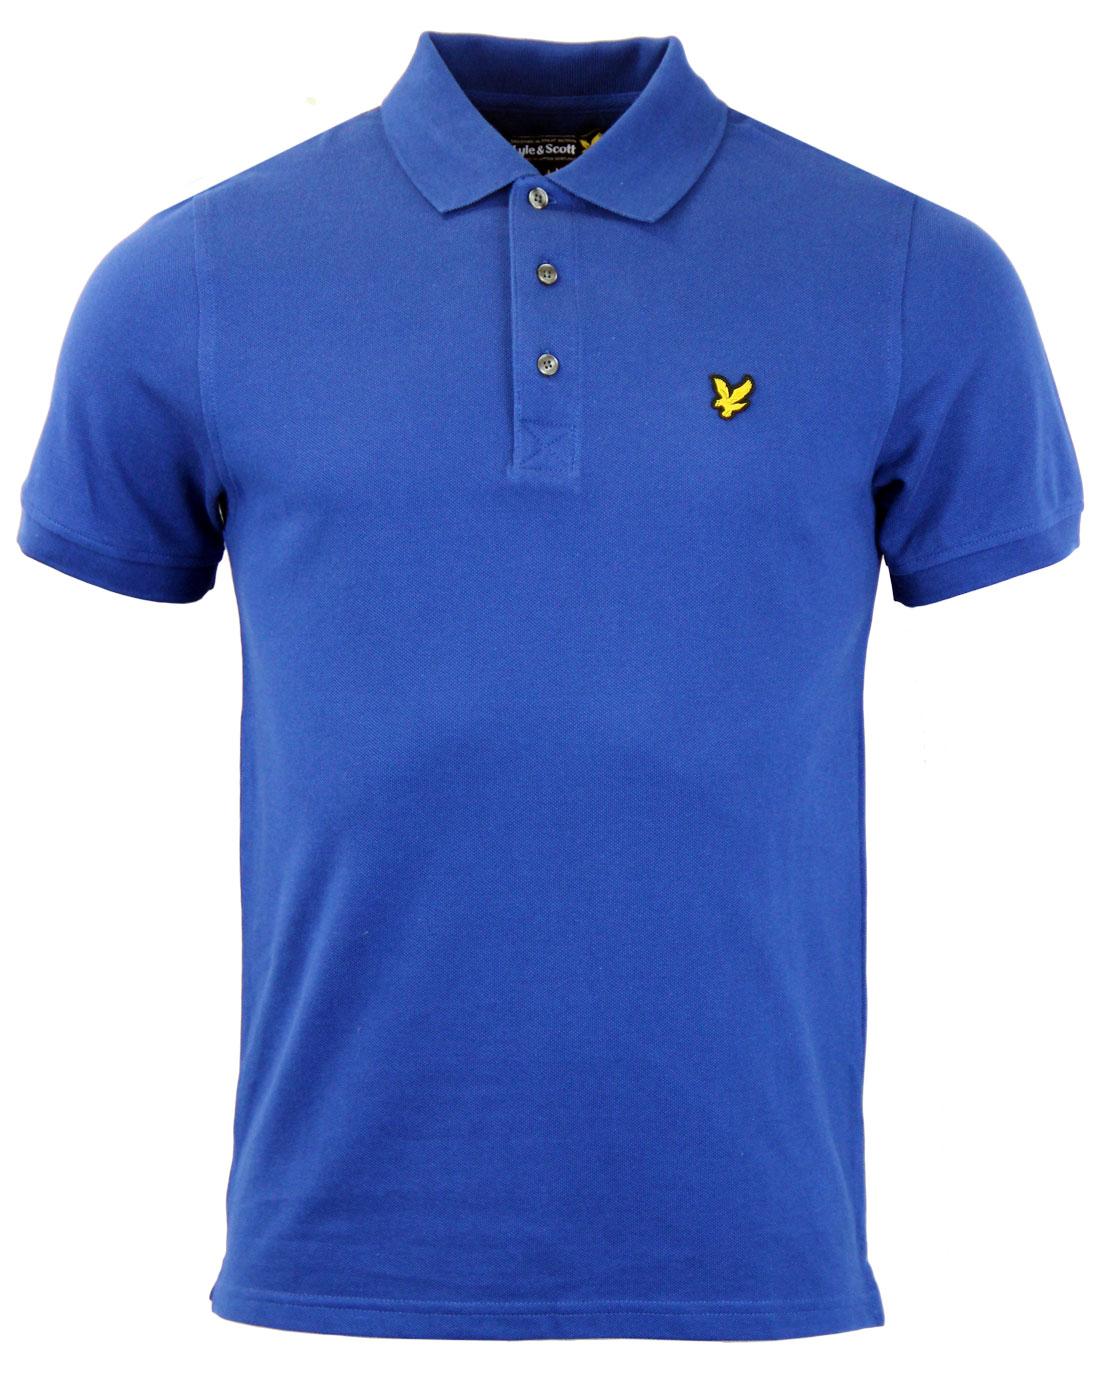 LYLE AND SCOTT Retro Mod SS Pique Polo Shirt in Saltire Blue